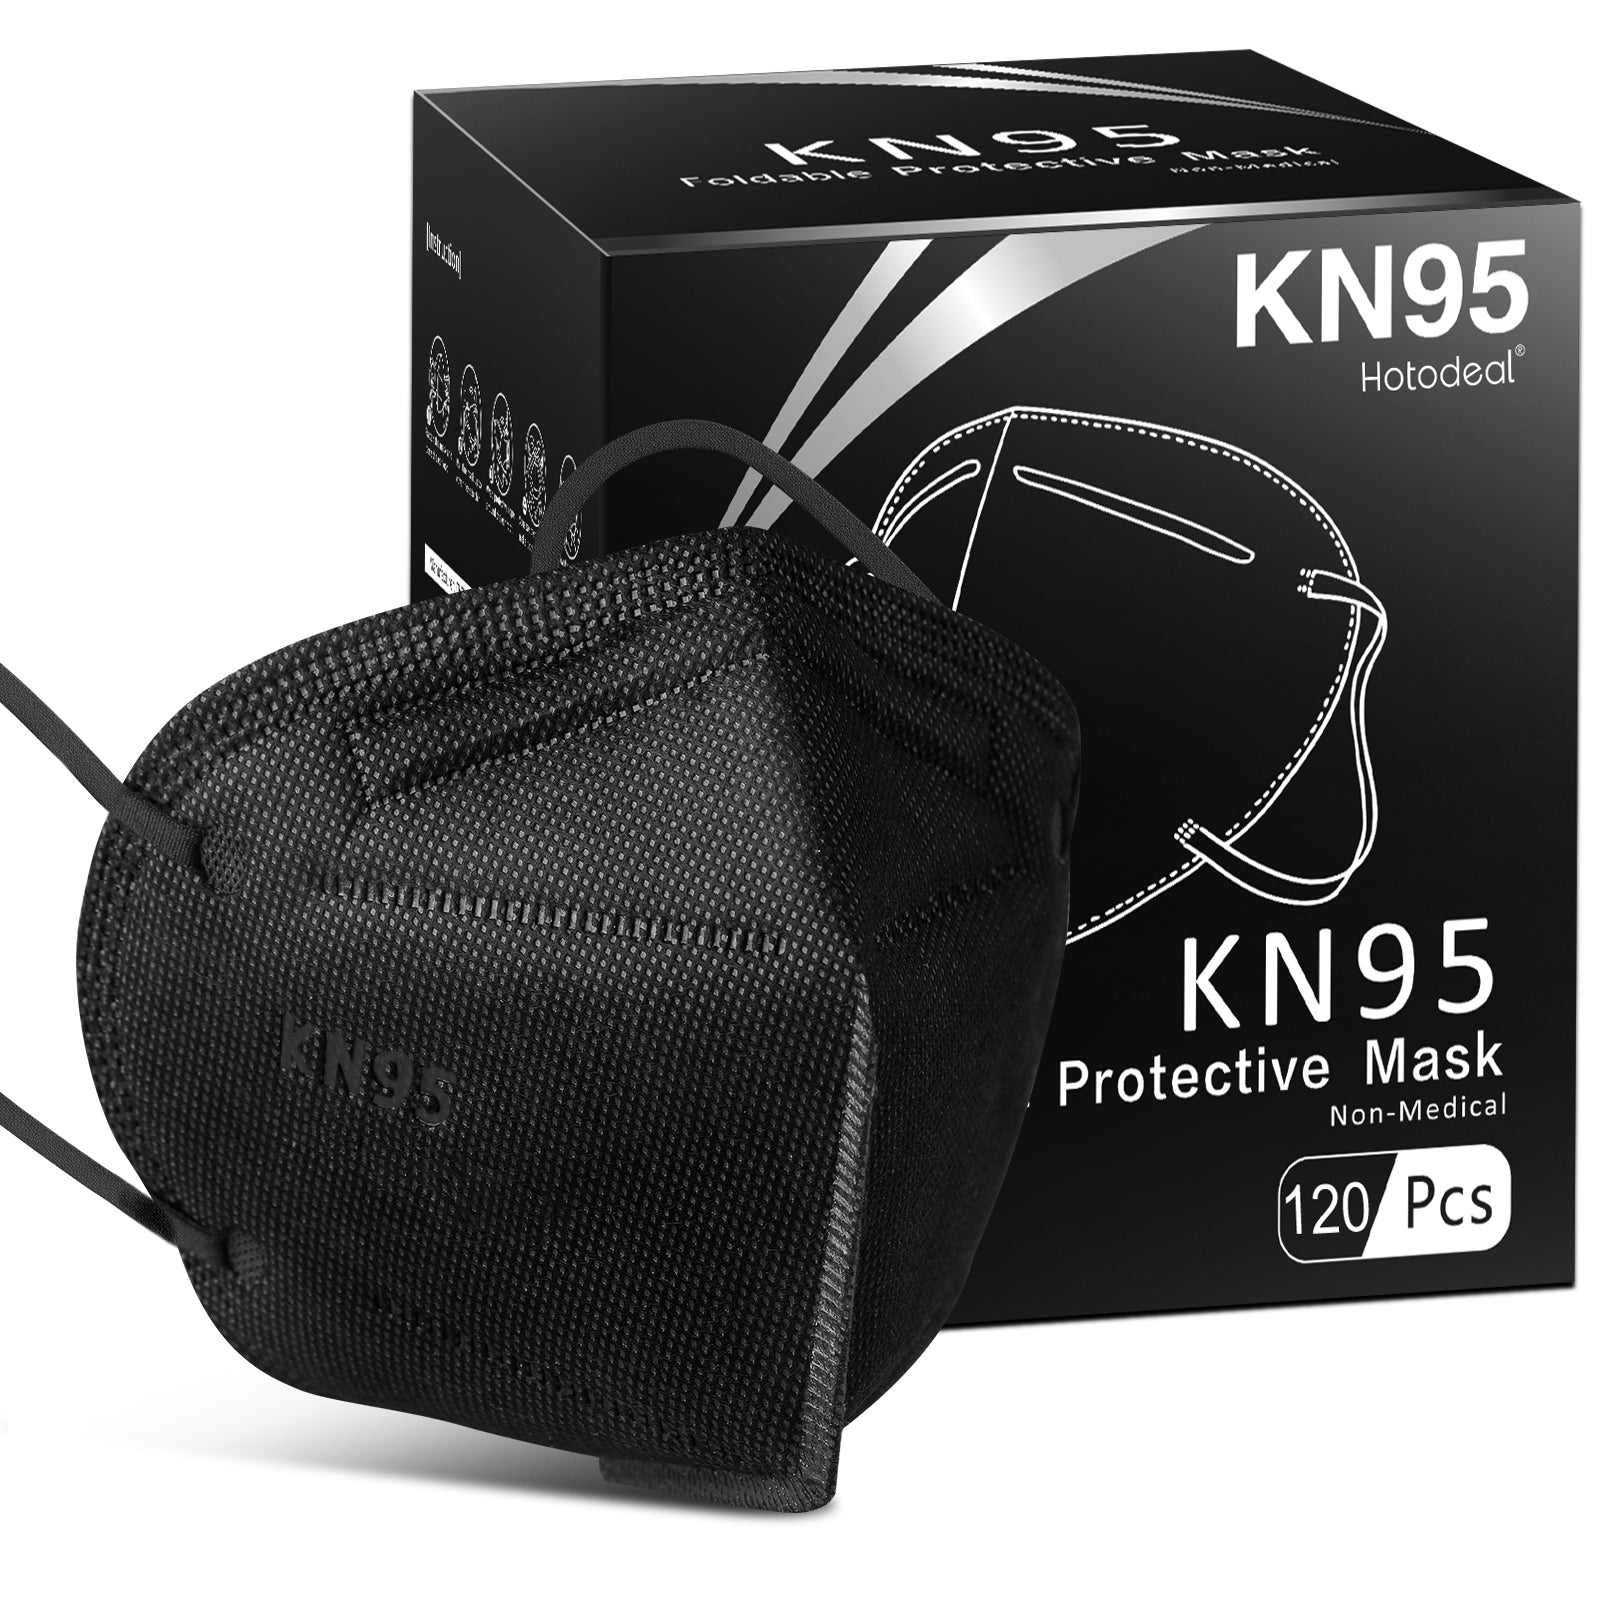 KN95 Face Mask 40 PCs, Filter Efficiency≥95%, 5 Layers Cup Dust Mask, Masks Against PM2.5 from Fire Smoke, Dust, for Men, Women, Essential Workers(Black)